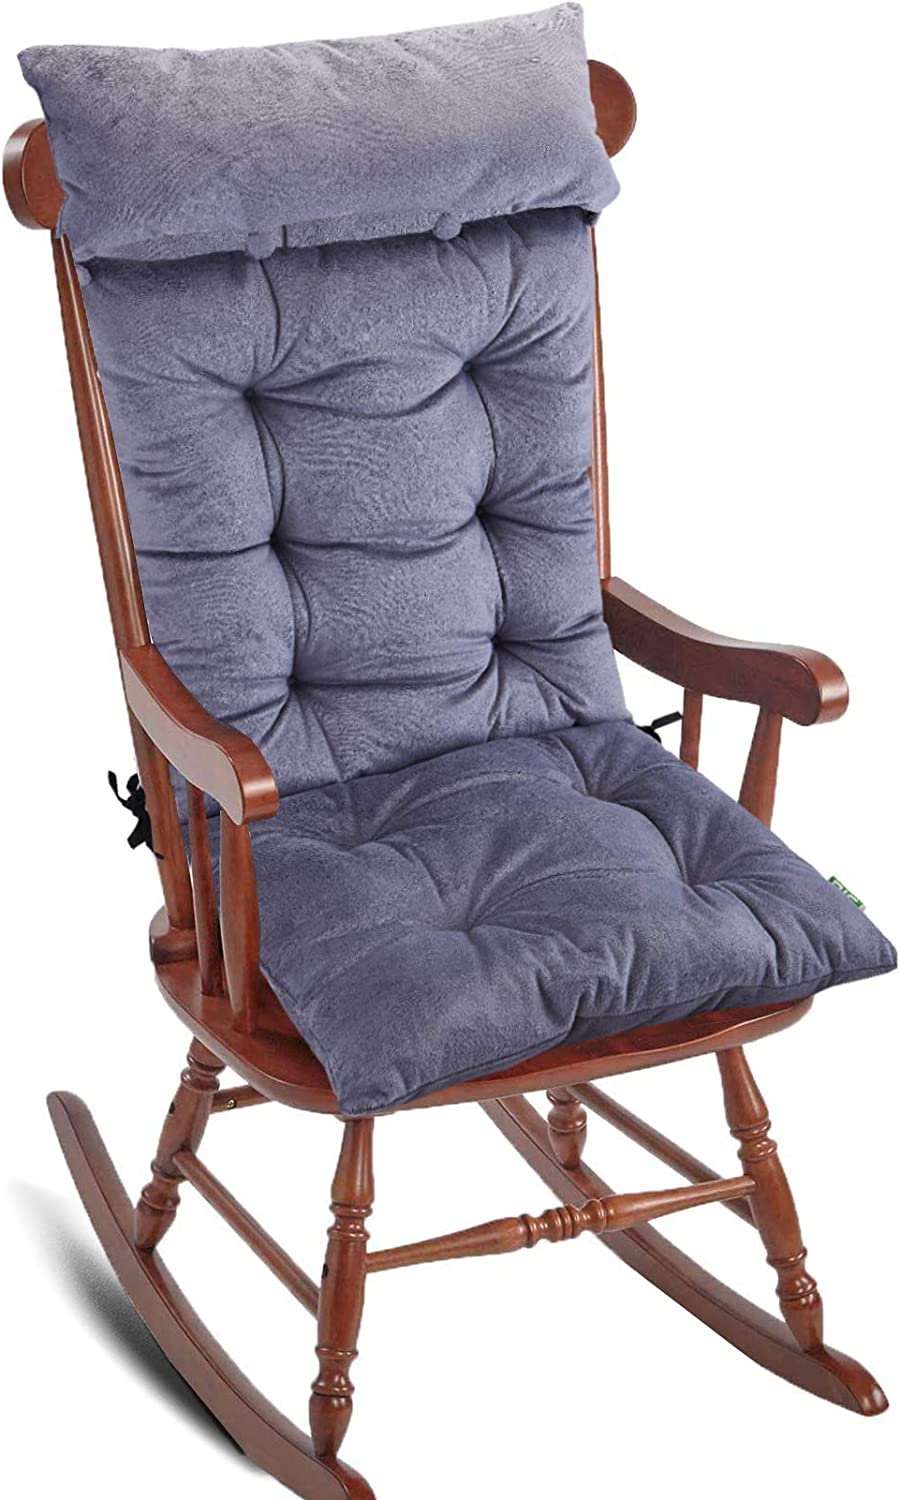 Rocking Chair Cushion Set with Detachable Neck Pillow Back Support